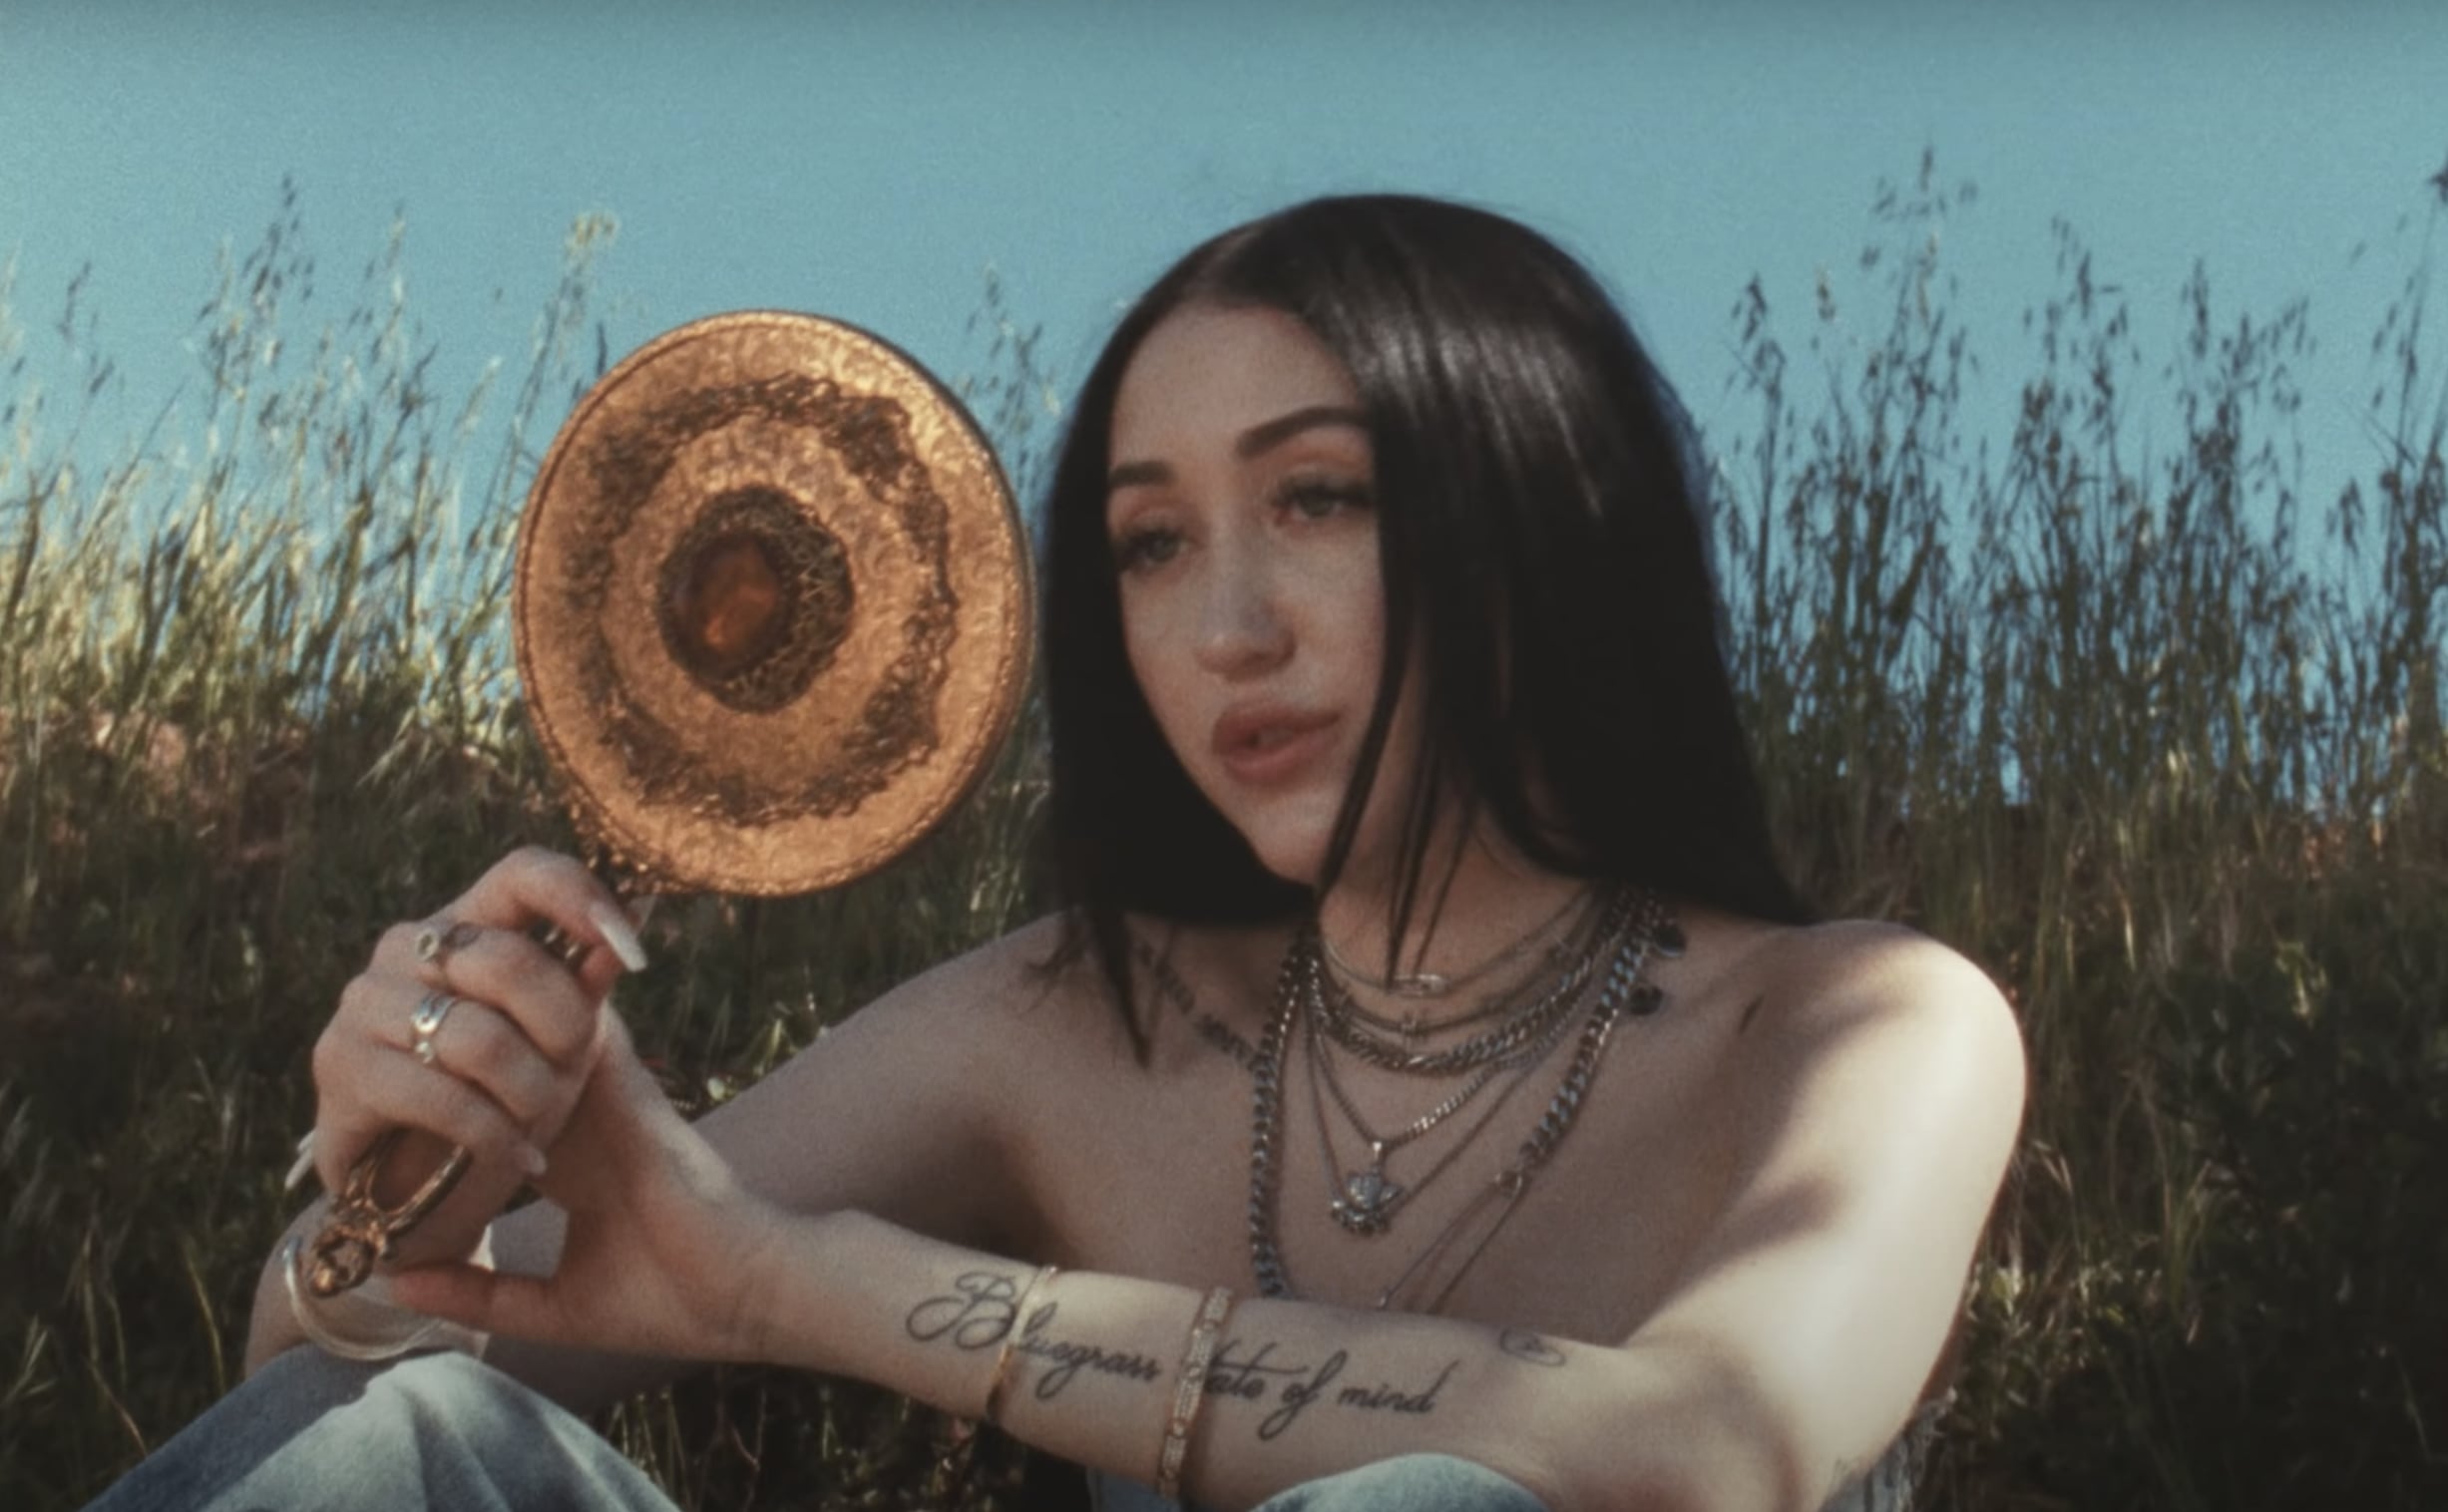 Listen to Noah Cyrus' Debut Single 'Make Me (Cry)' Feat. Labrinth